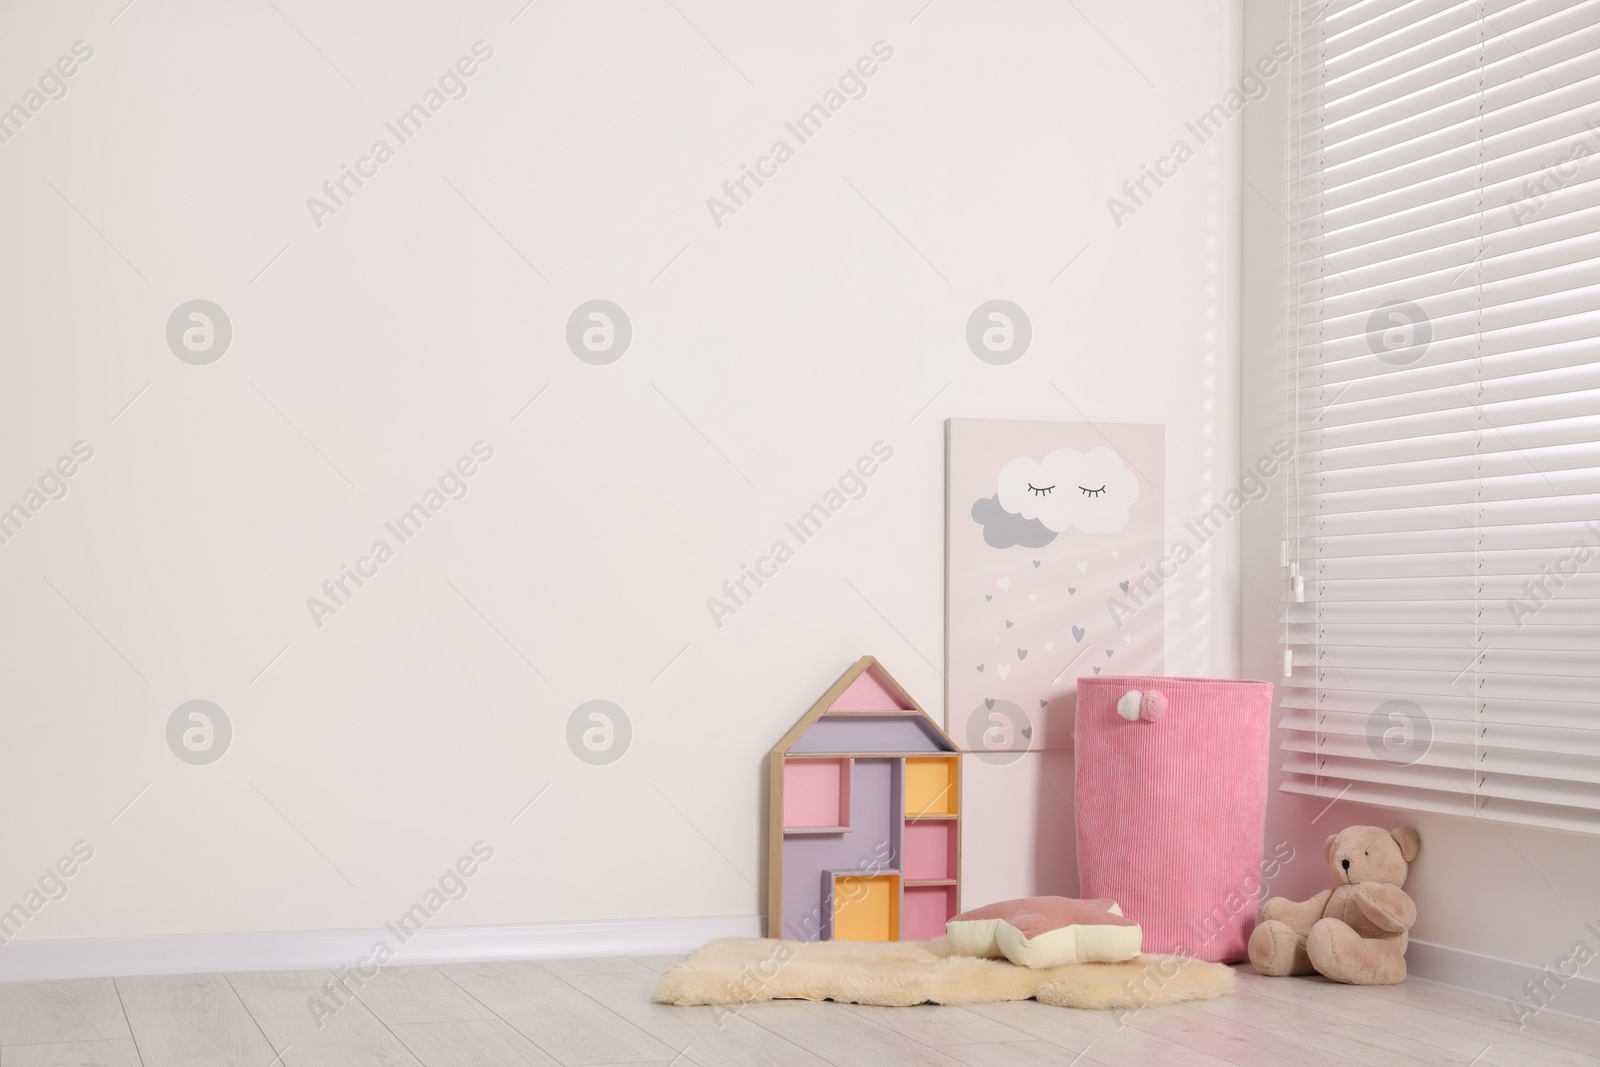 Photo of Beautiful children's room with light wall and toys, space for text. Interior design